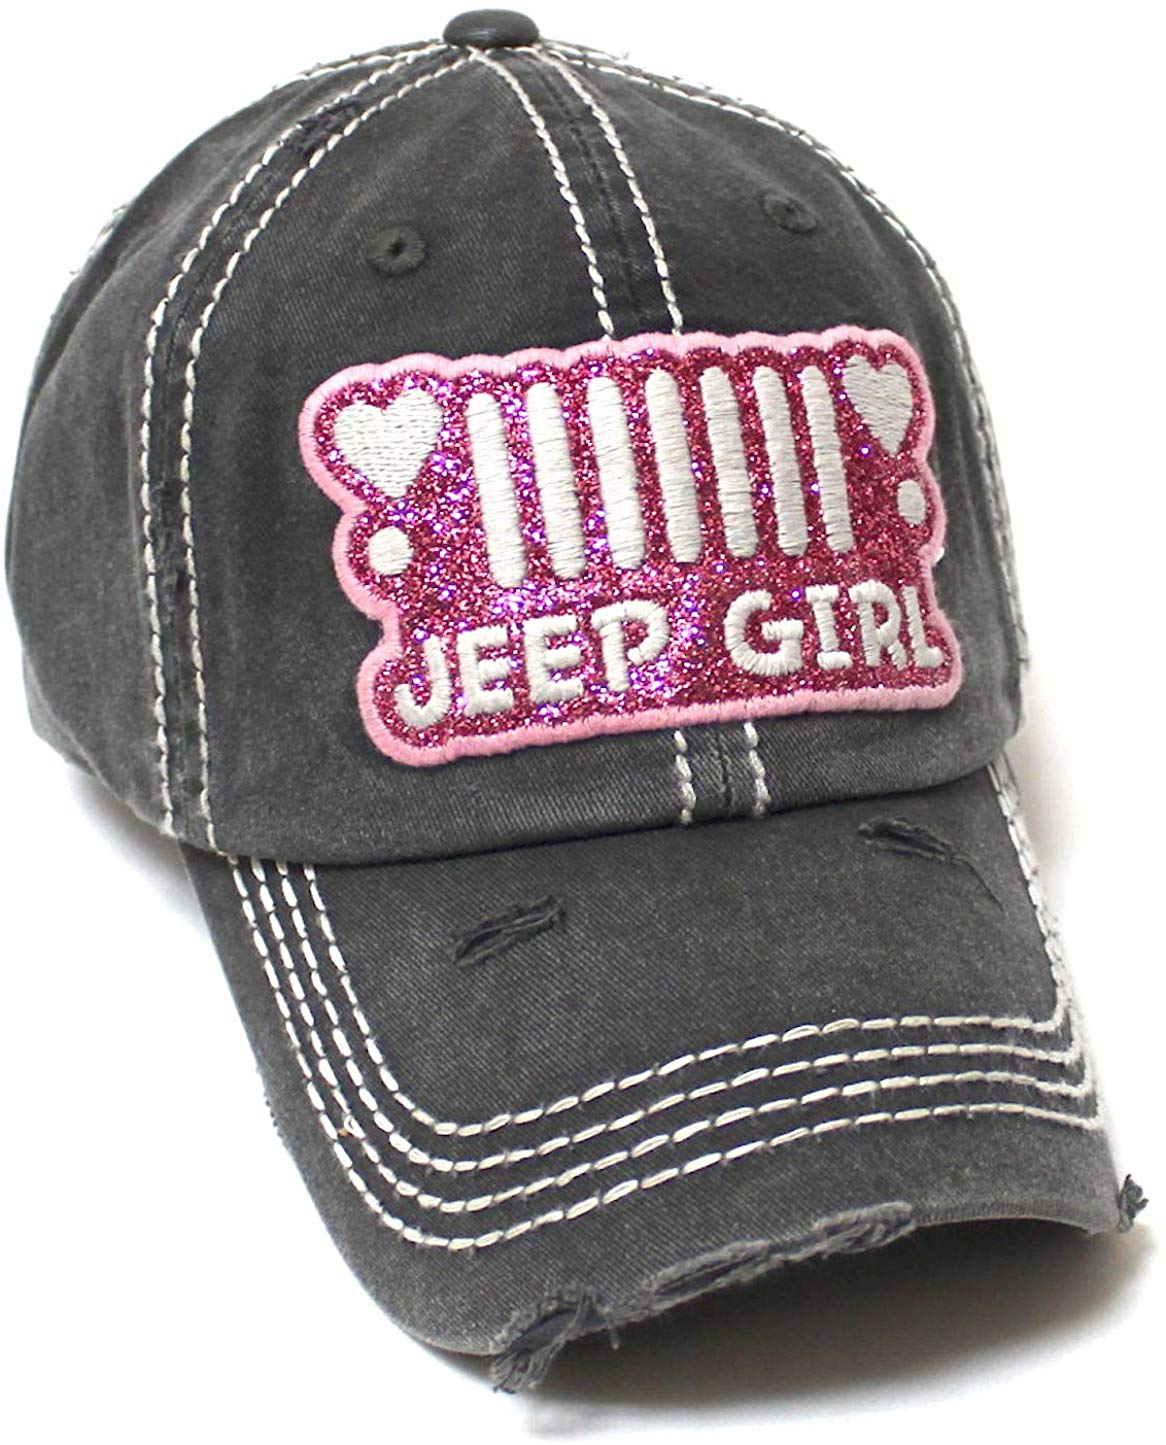 Women's Ballcap Jeep Girl Pink Glitter, Hearts Patch Embroidery Hat, Vintage Black - Caps 'N Vintage 